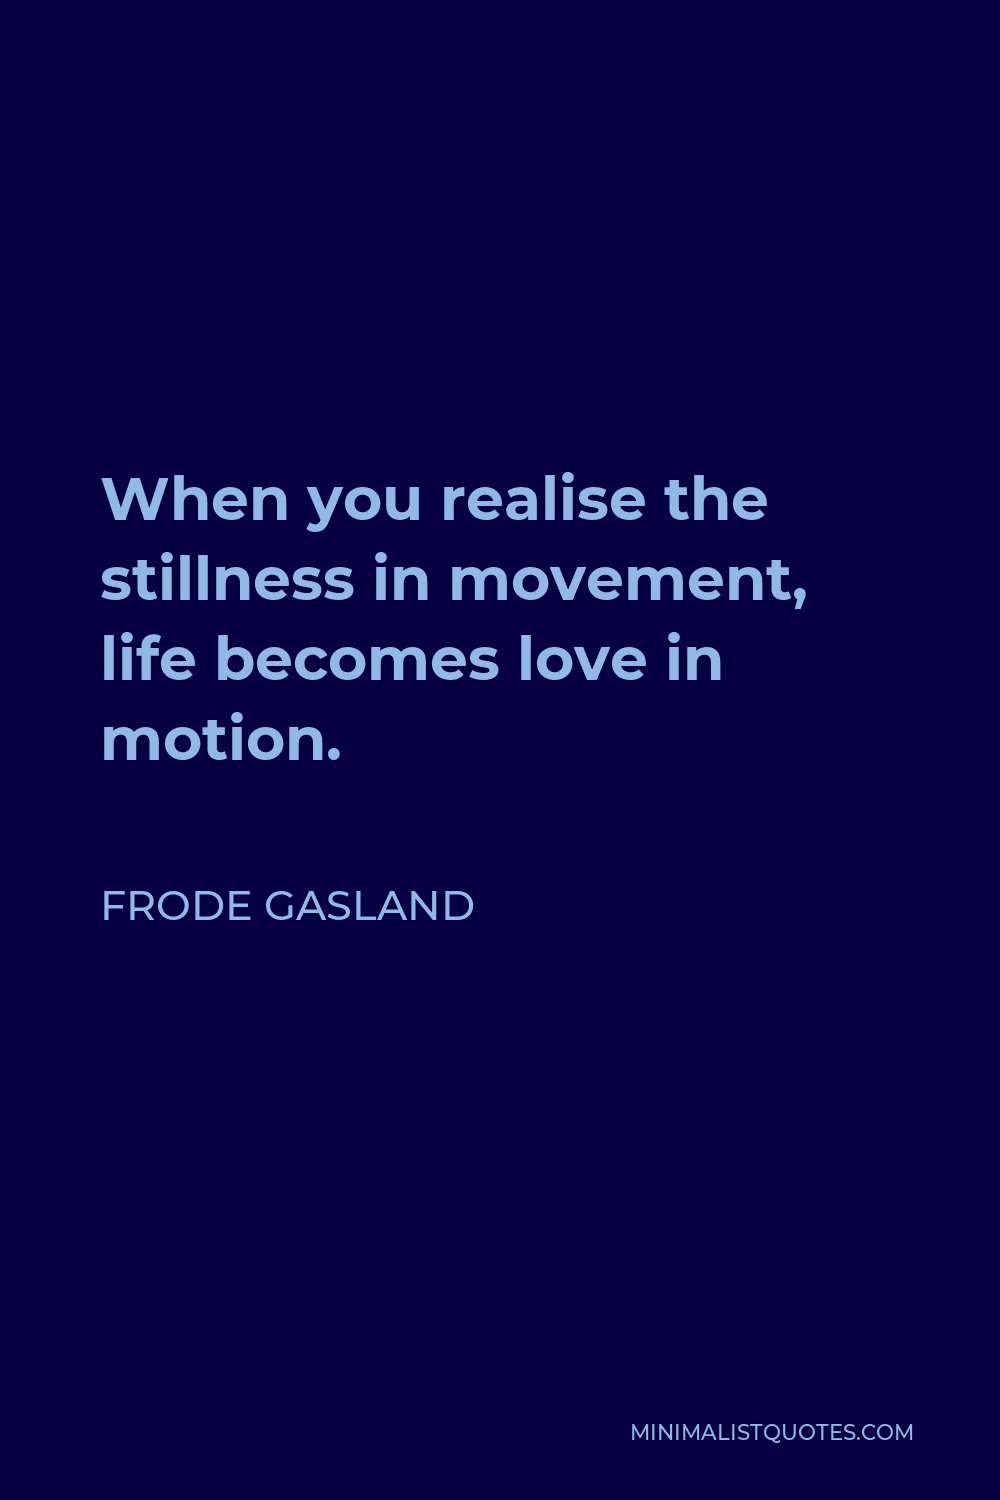 Frode Gasland Quote - When you realise the stillness in movement, life becomes love in motion.